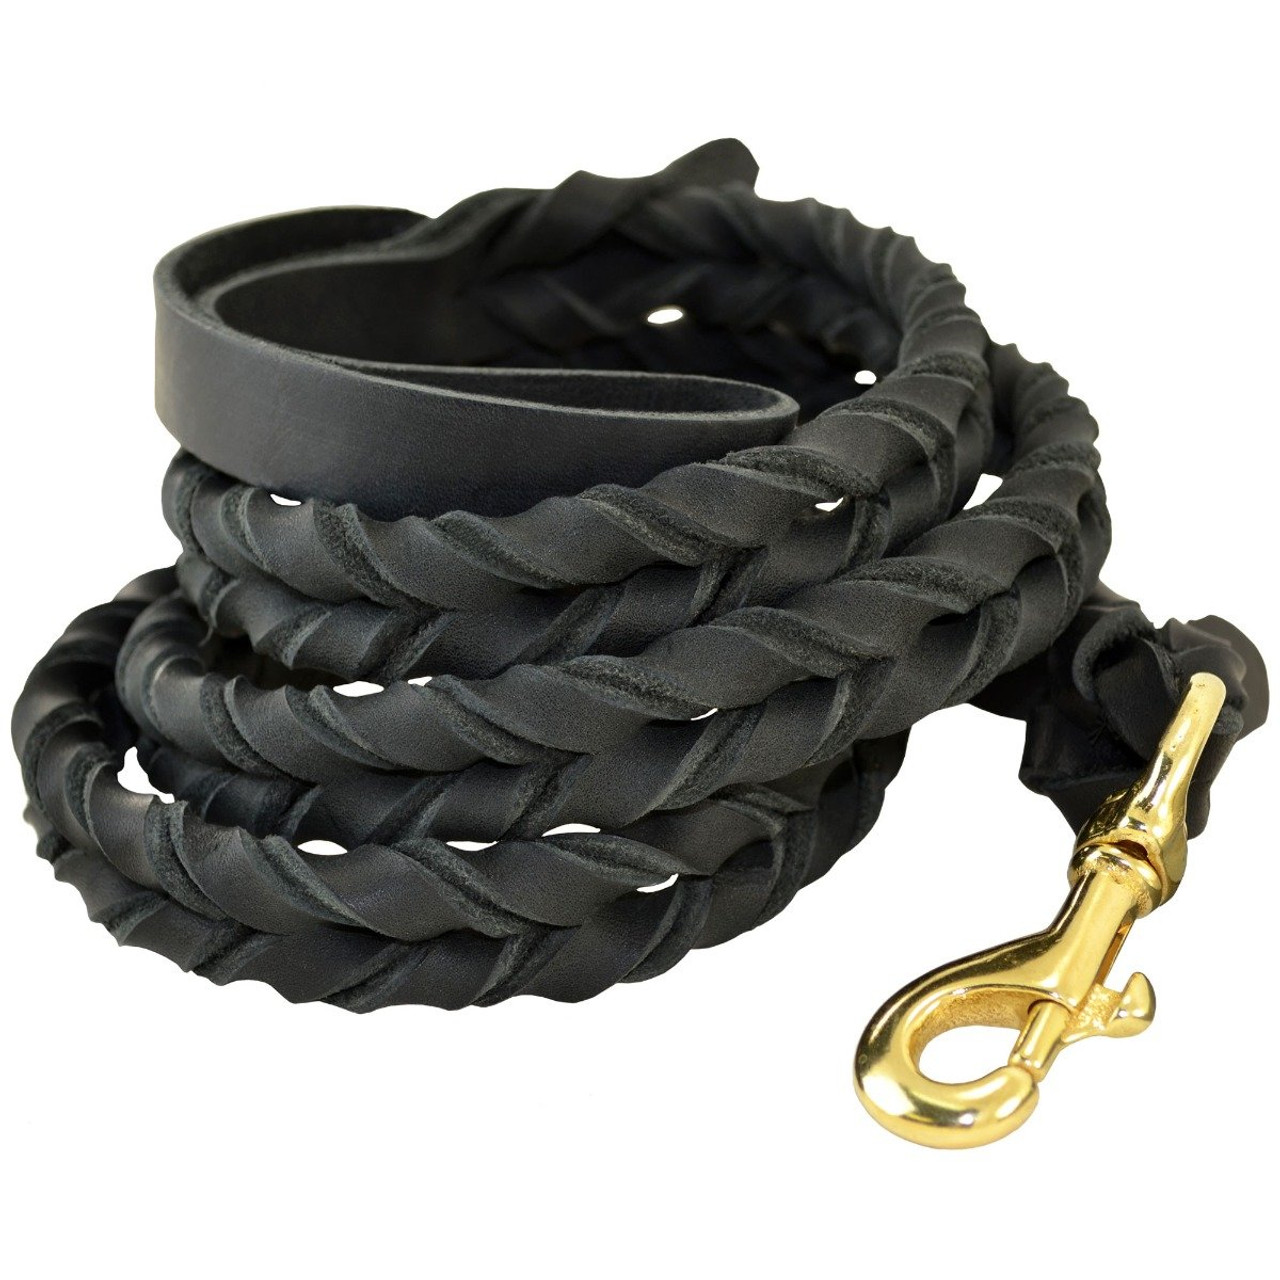 Deluxe Full-Braided Leather Dog Leash - Ray Allen Manufacturing